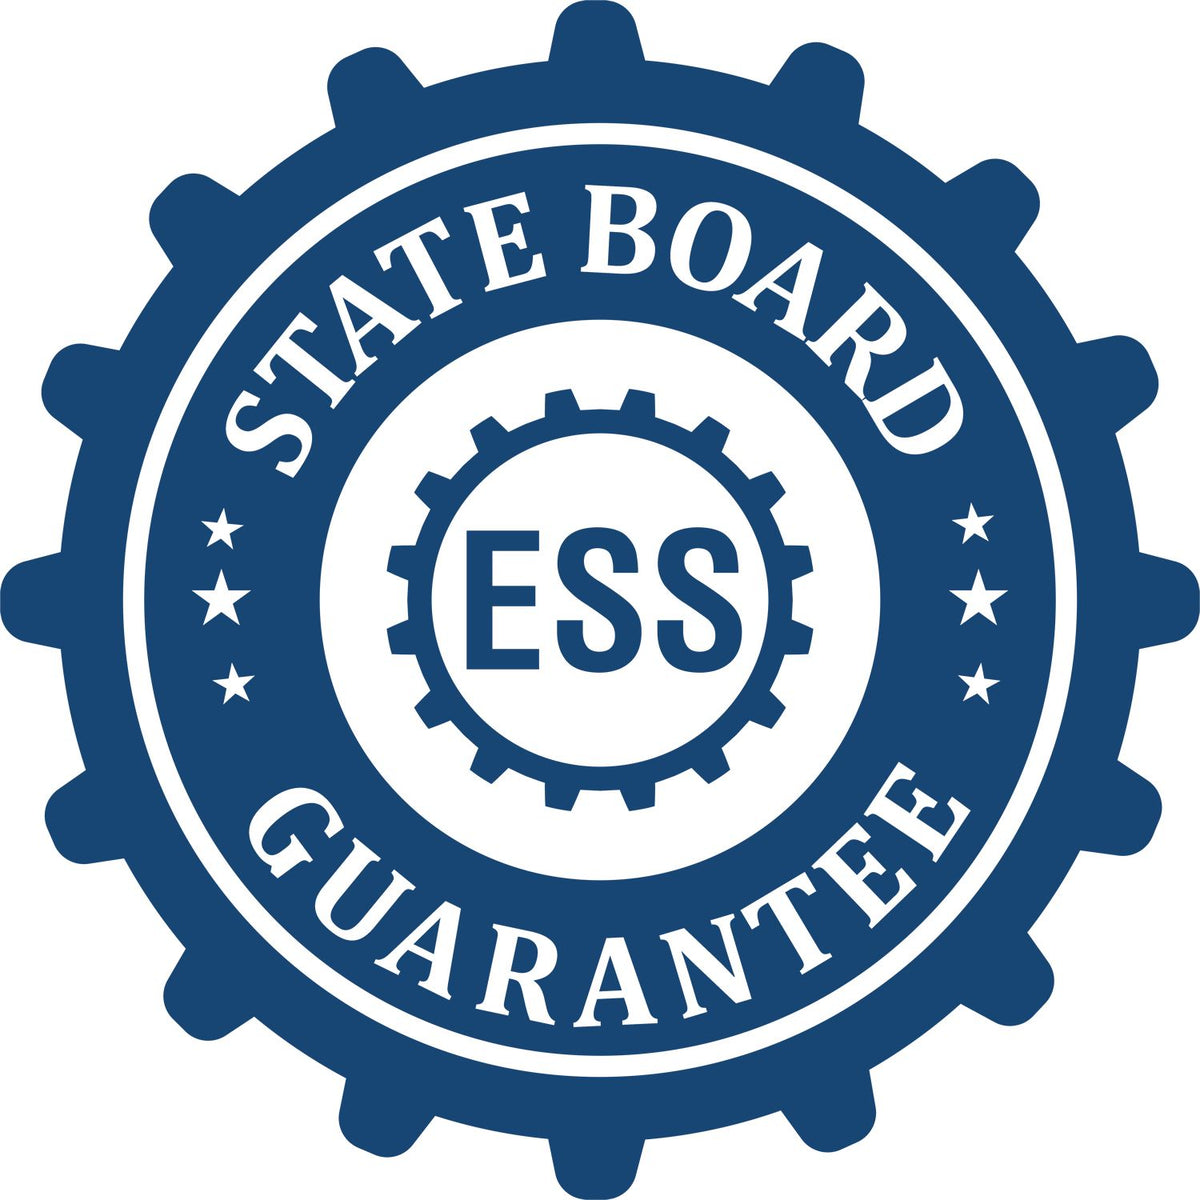 An emblem in a gear shape illustrating a state board guarantee for the Maryland Desk Architect Embossing Seal product.